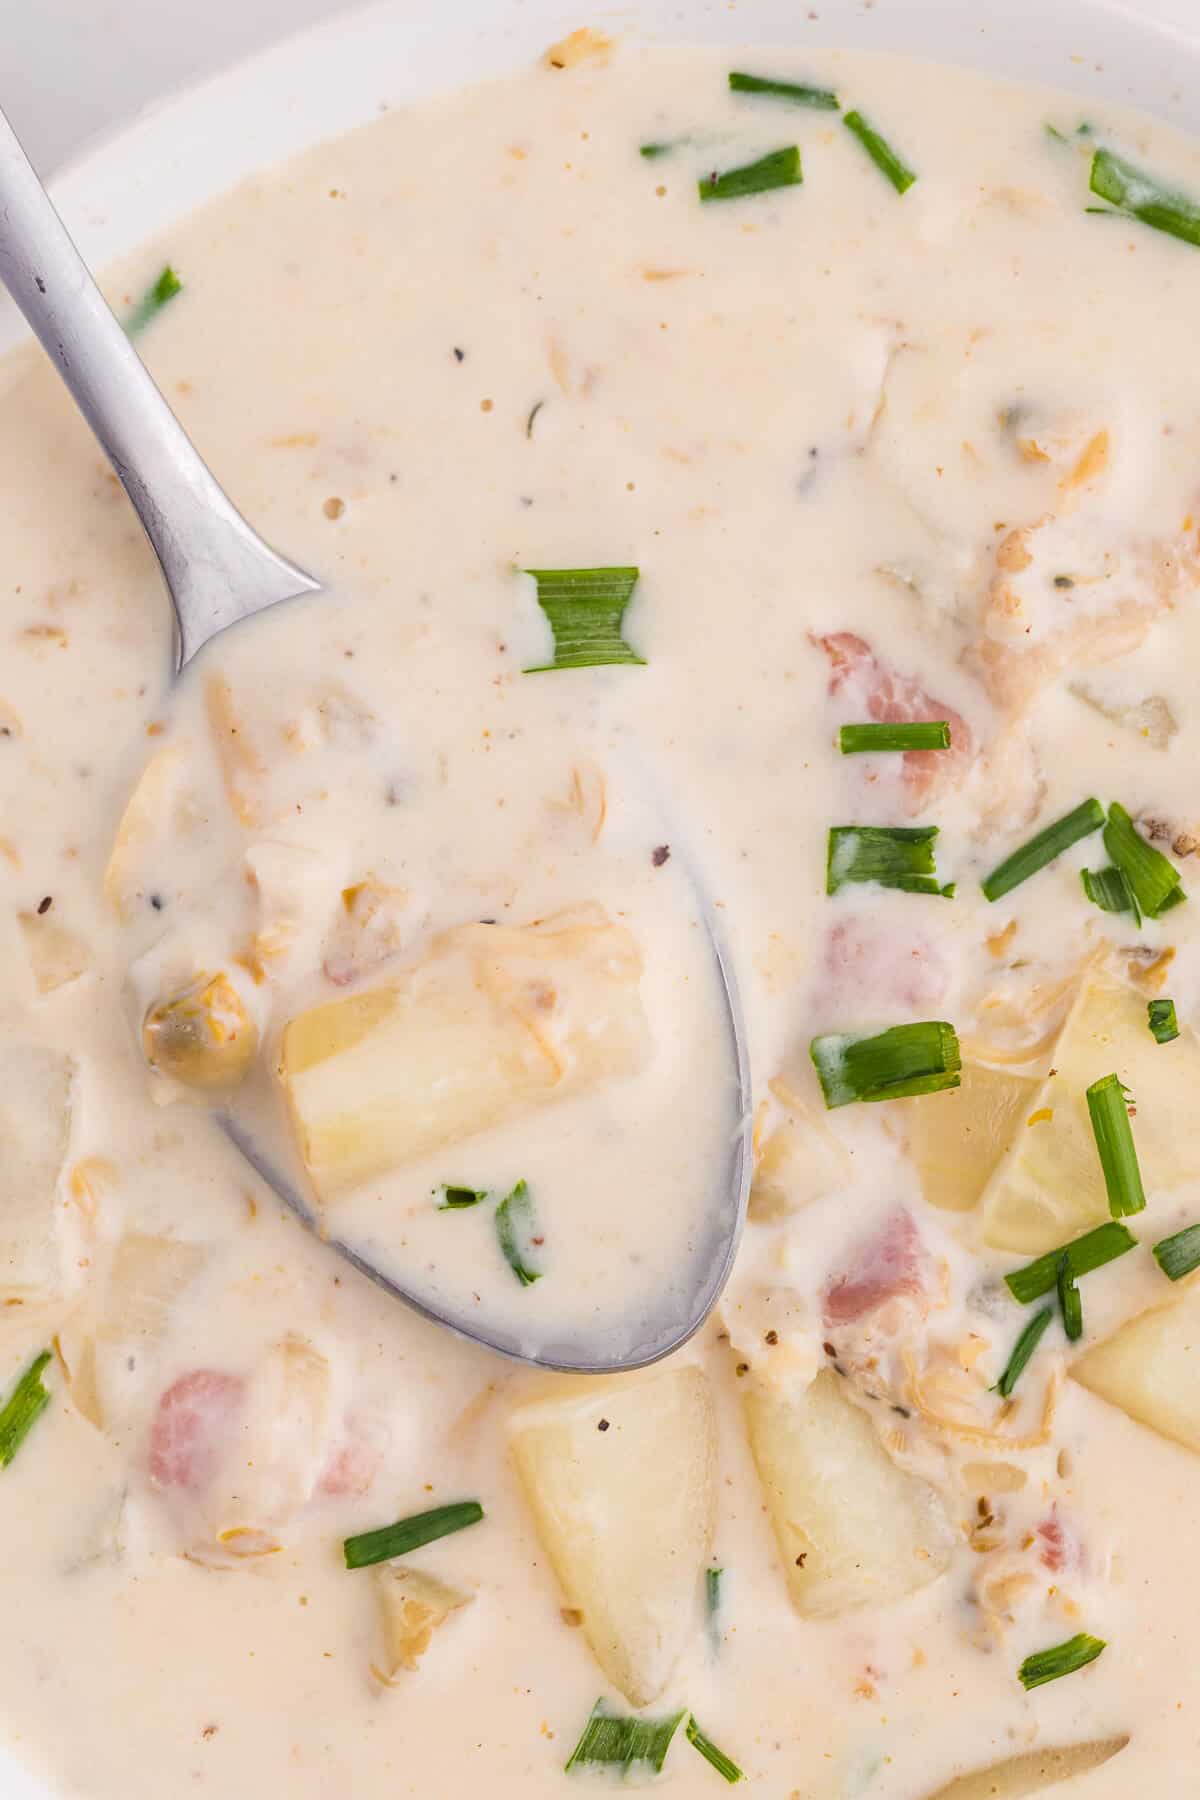 A spoon in a bowl of New England Clam Chowder.